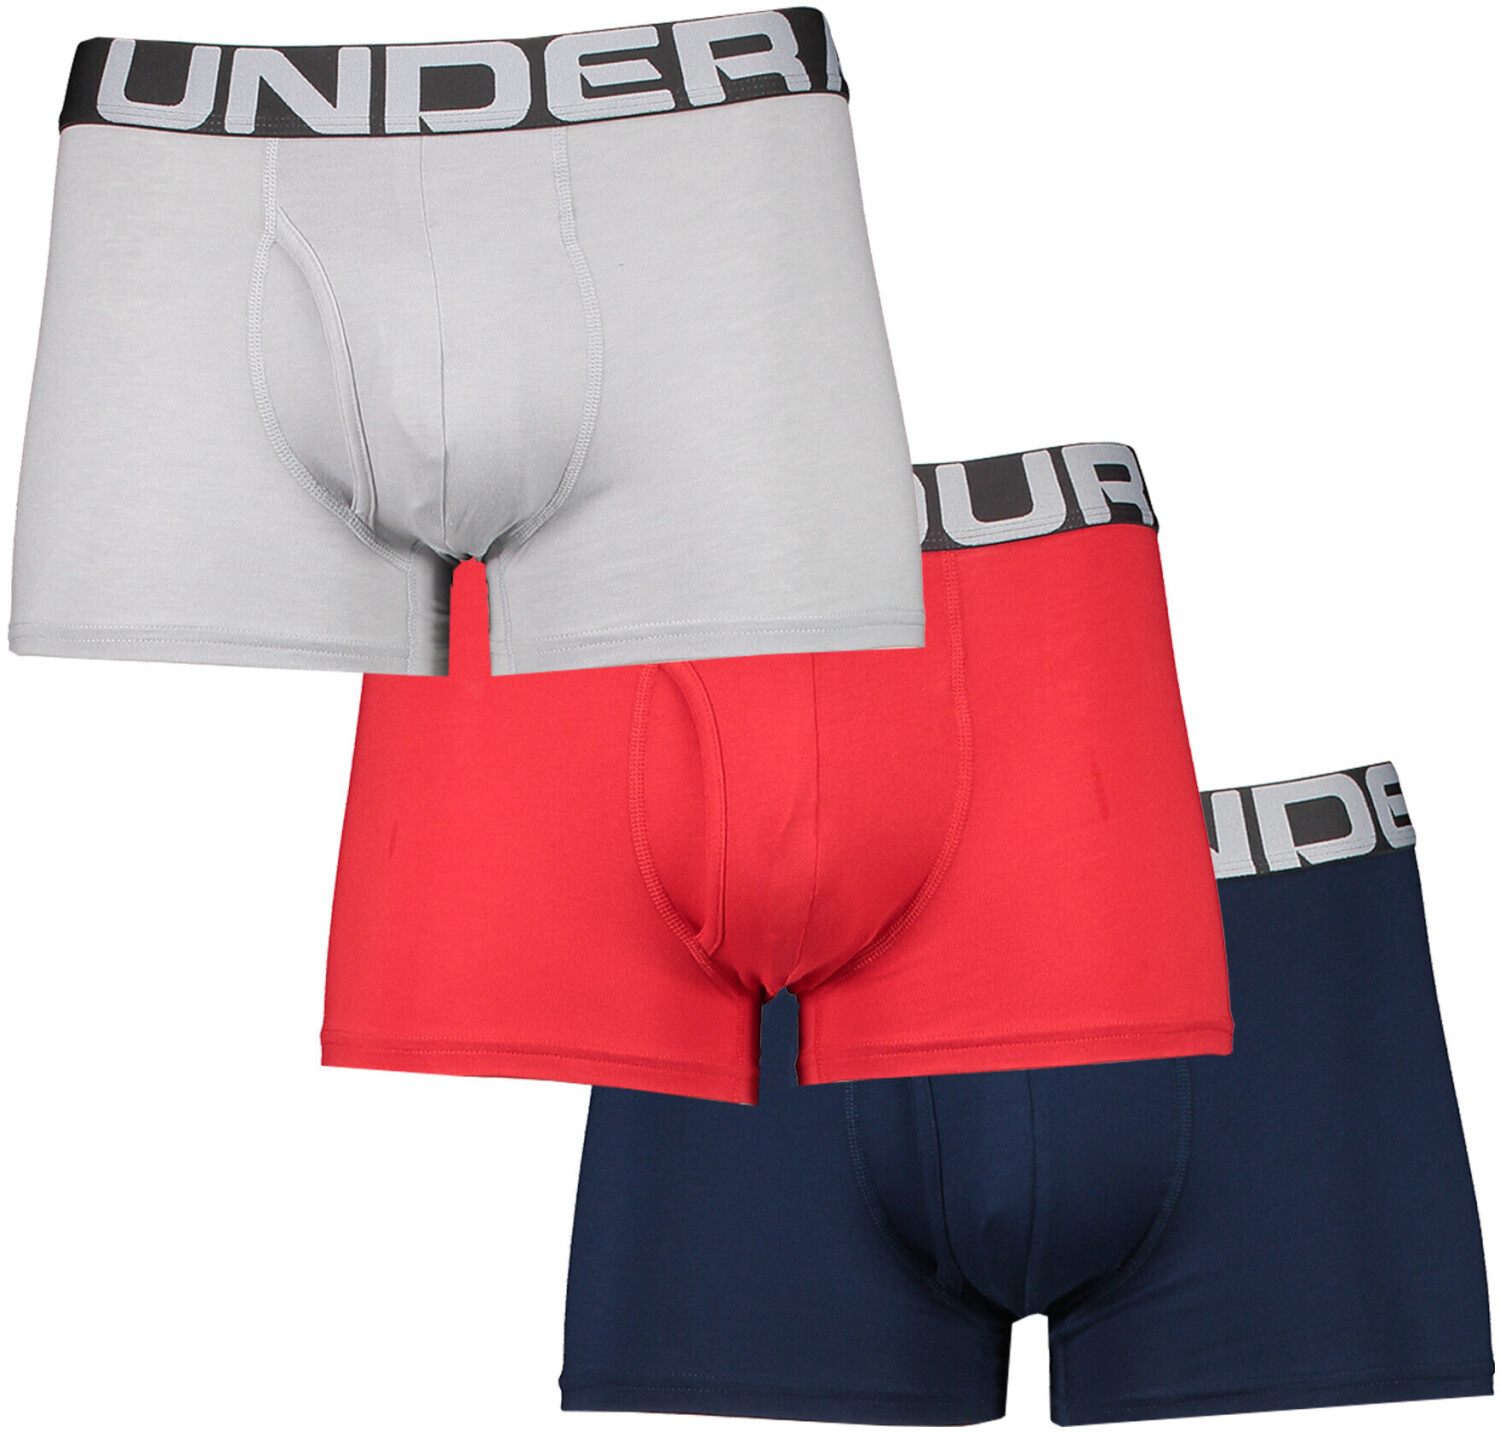 Buy Under Armour Men's Charged Cotton® Boxerjock® Boxers (3 Pack